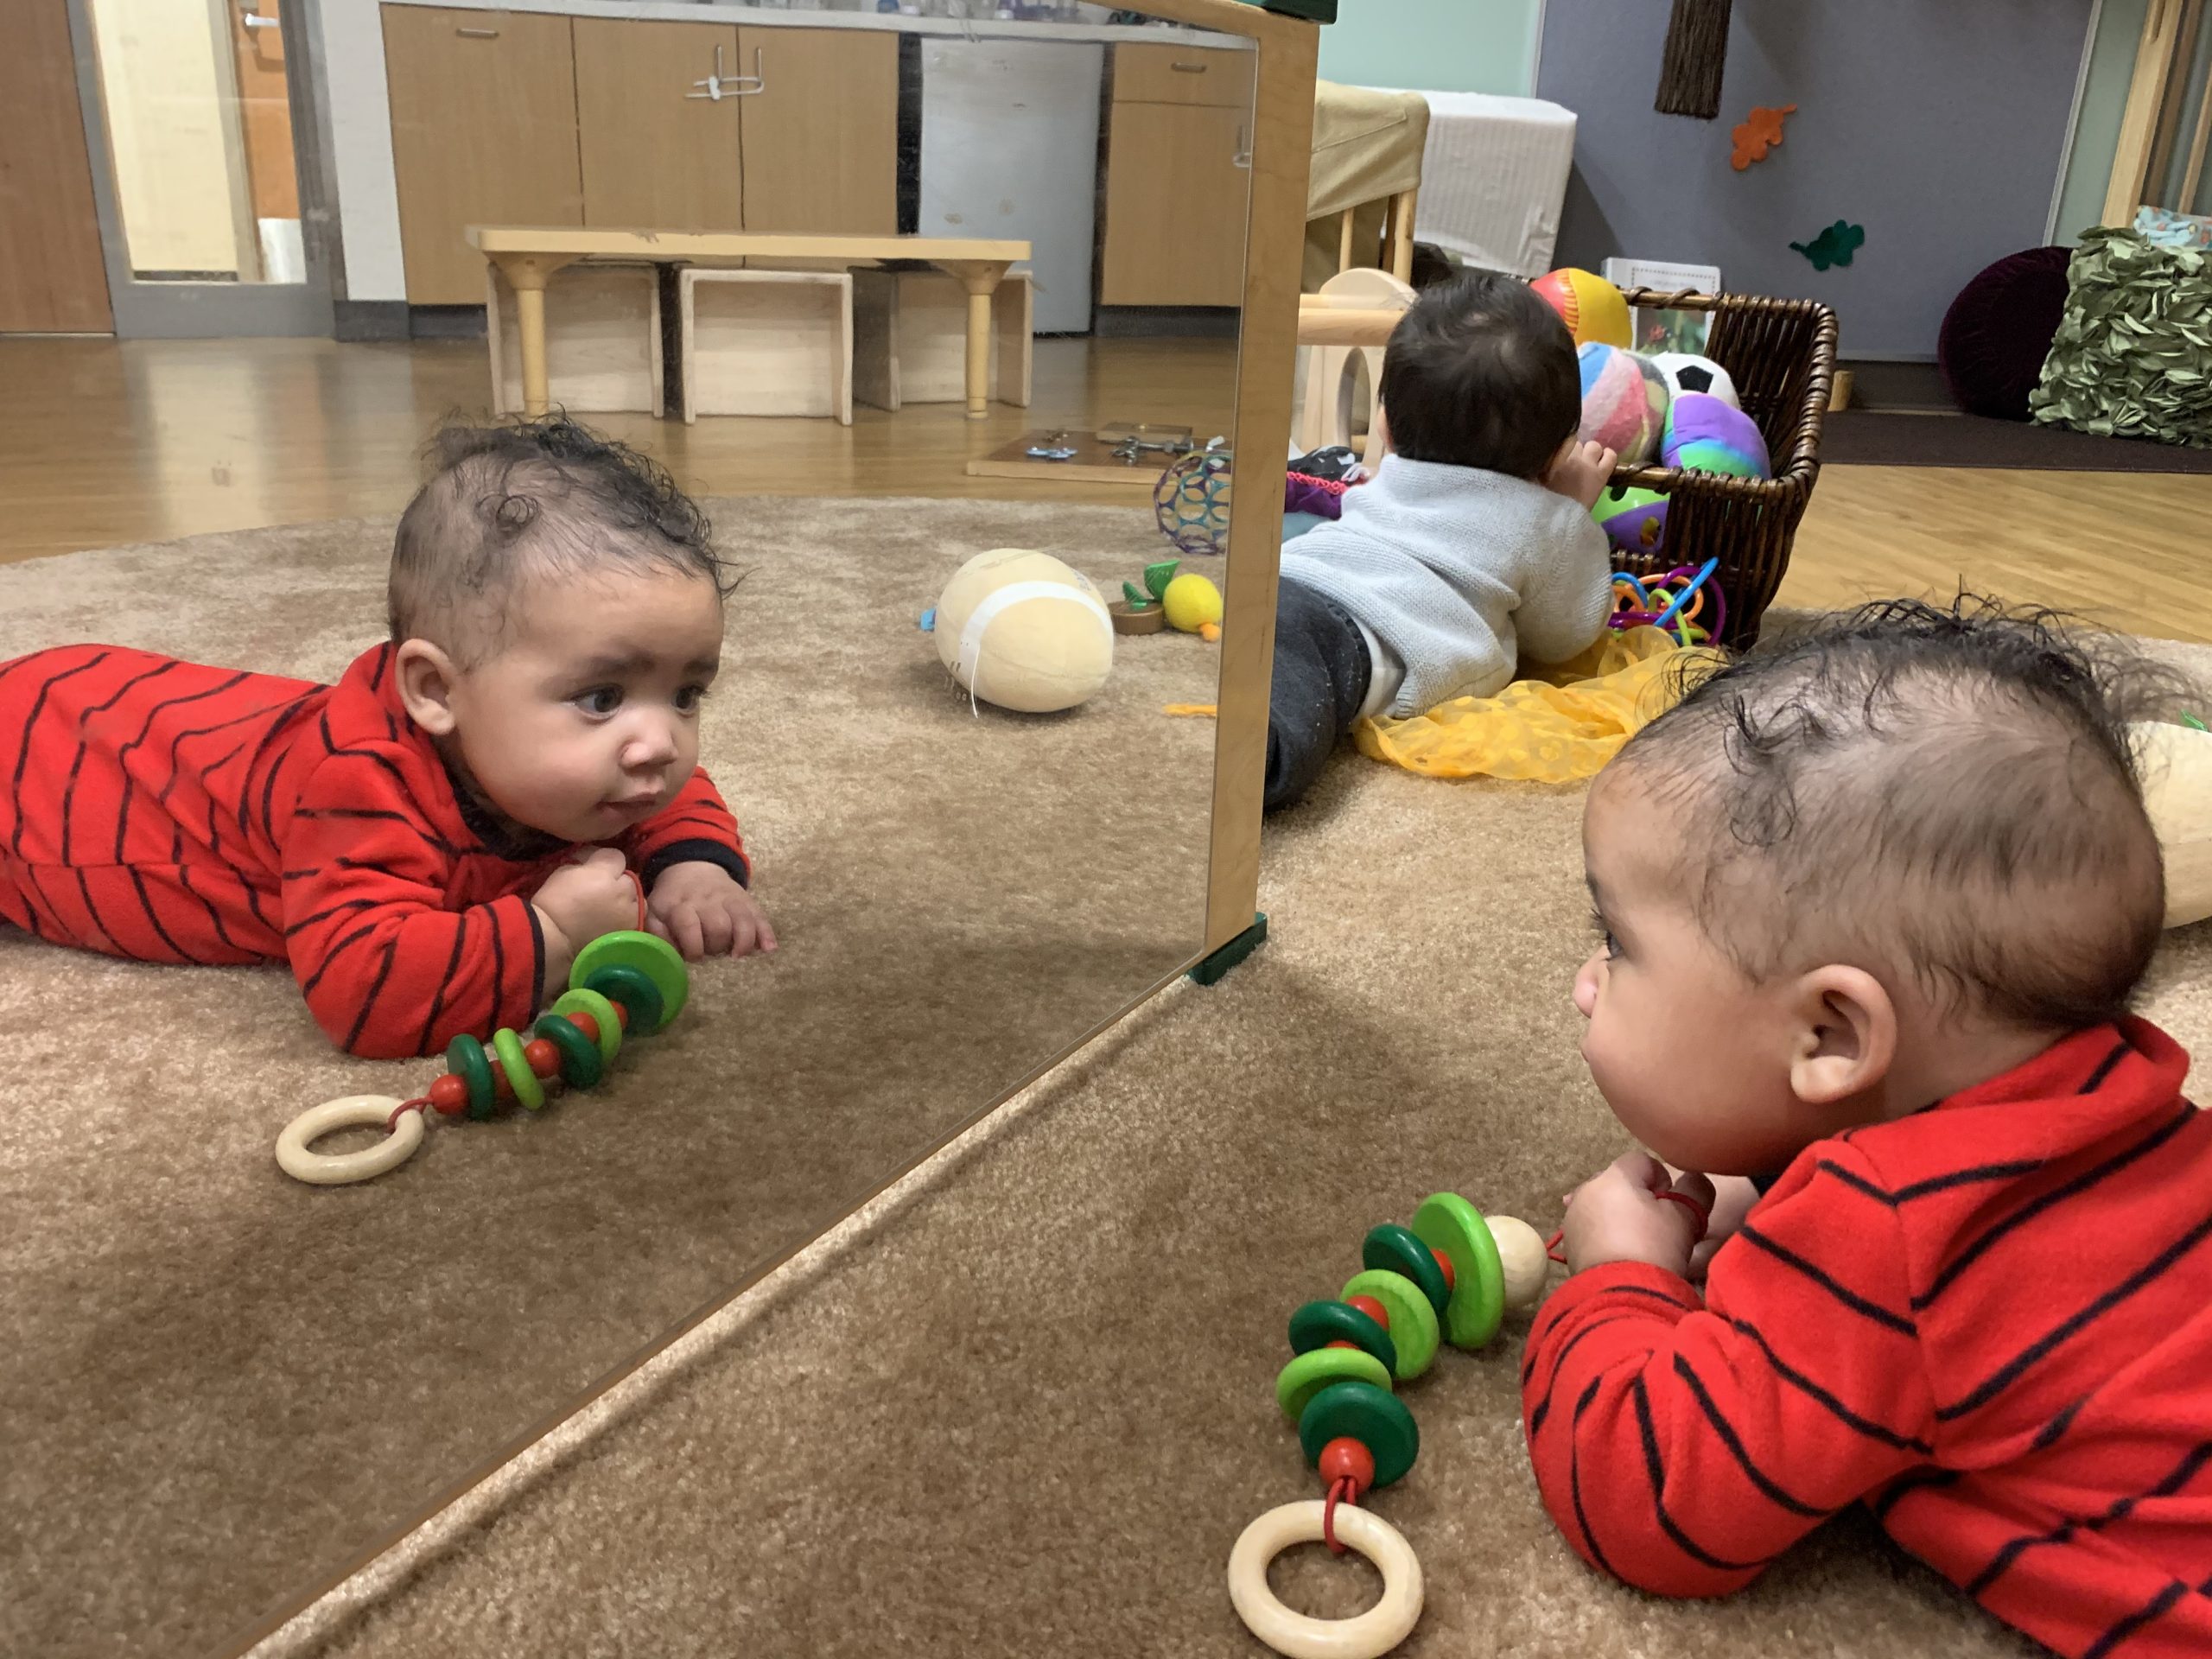 Baby looking carefully at himself in the mirror